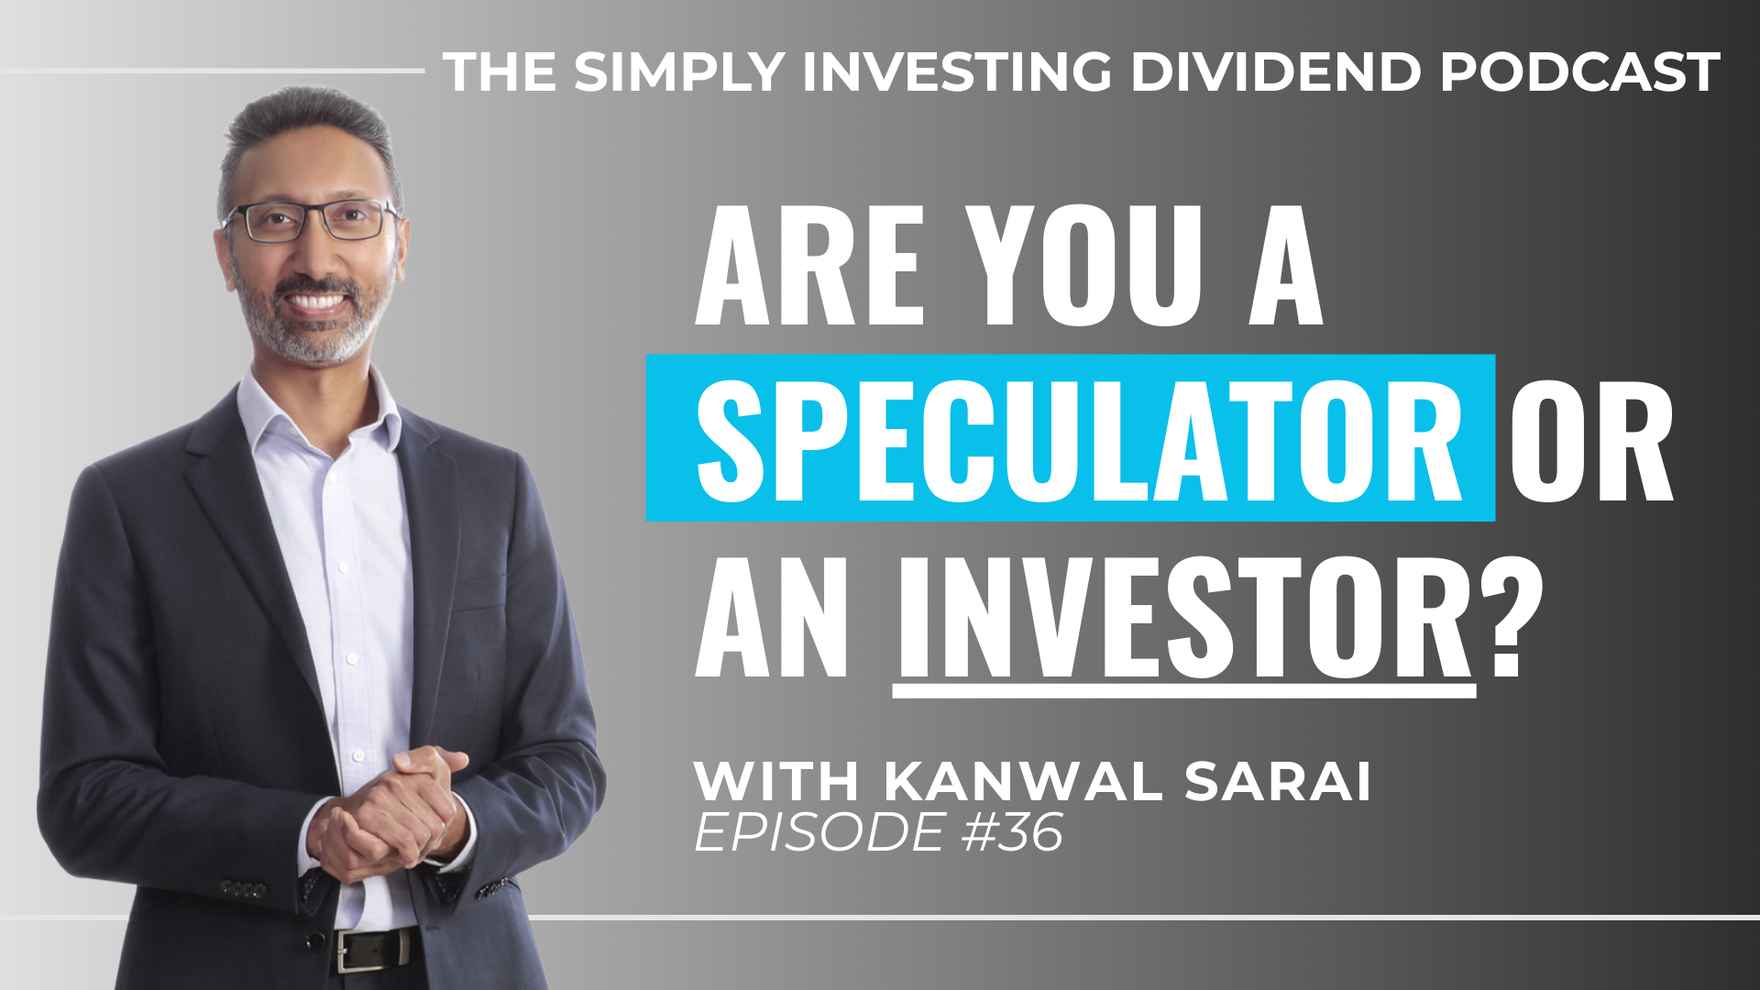 Simply Investing Dividend Podcast Episode 36 - Are You a Speculator or an Investor?